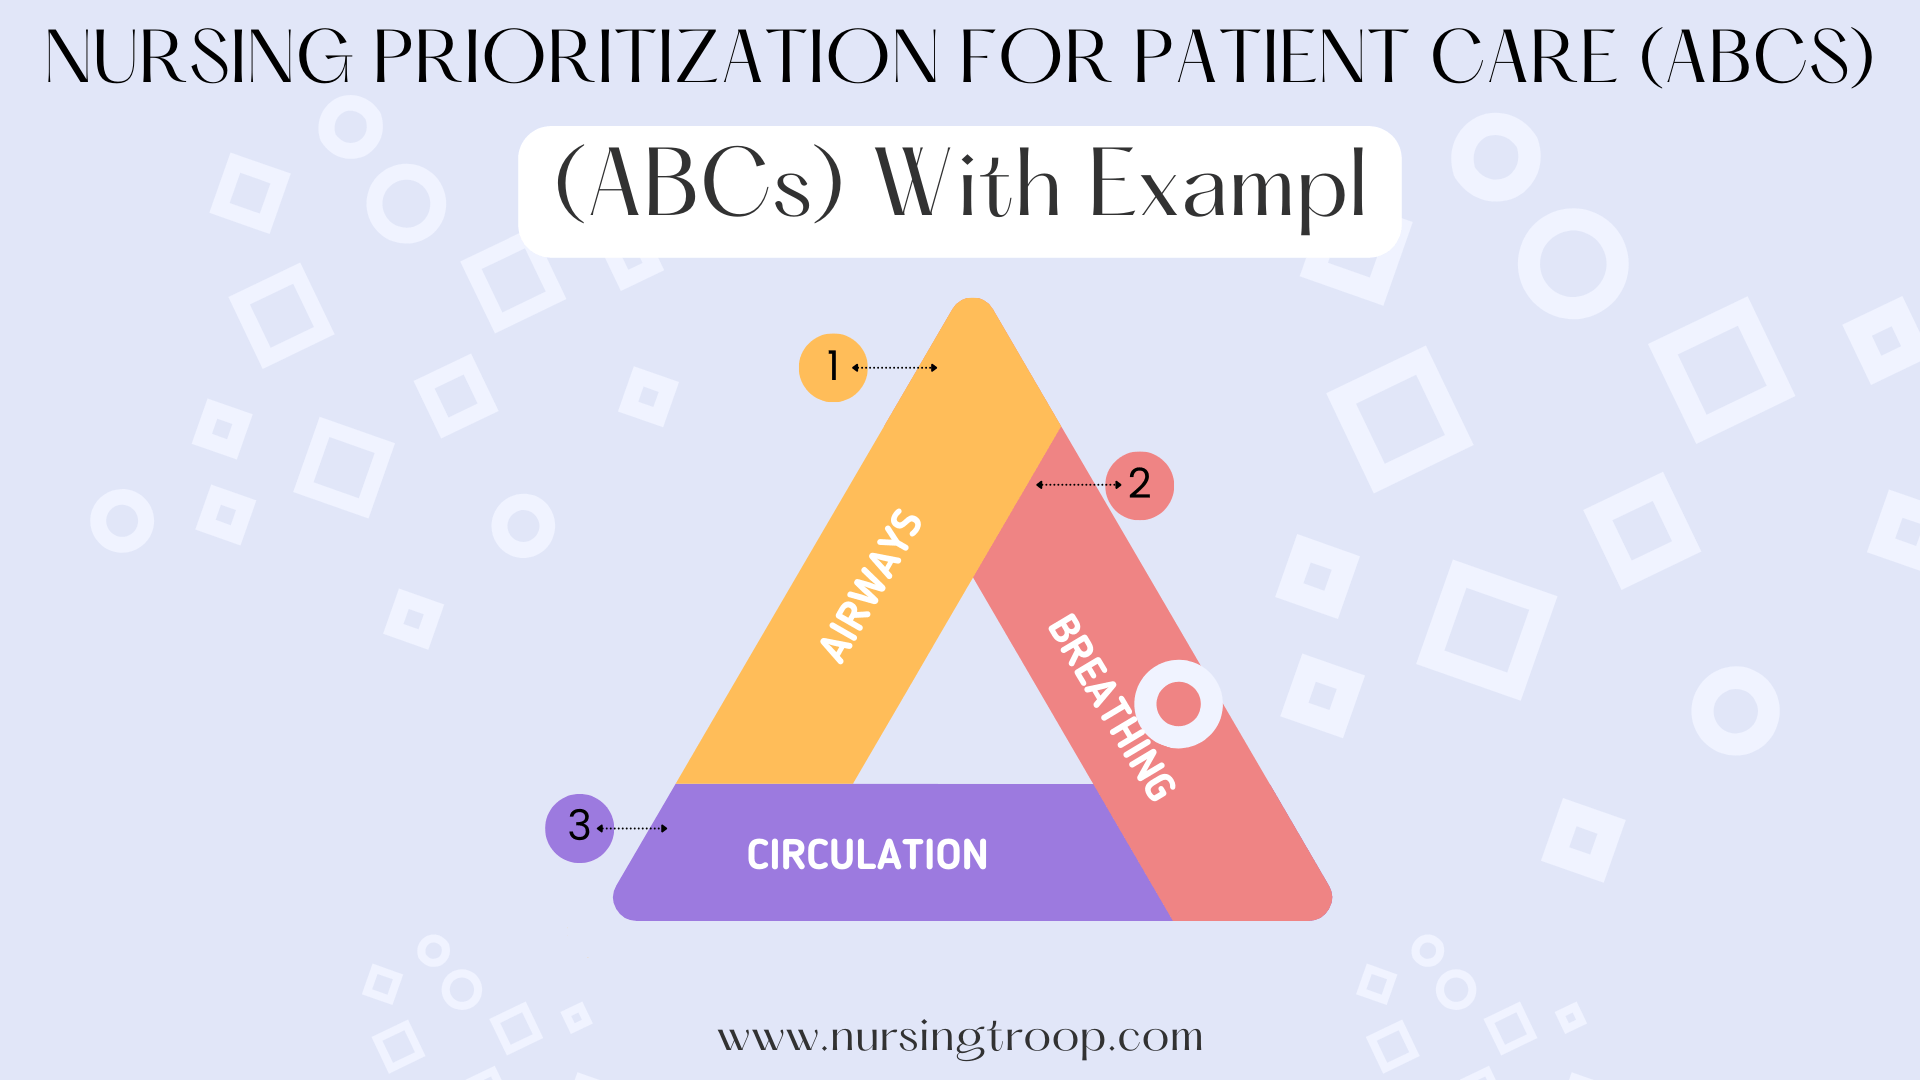 Nursing Prioritization for Patient Care (ABCs) with Examples